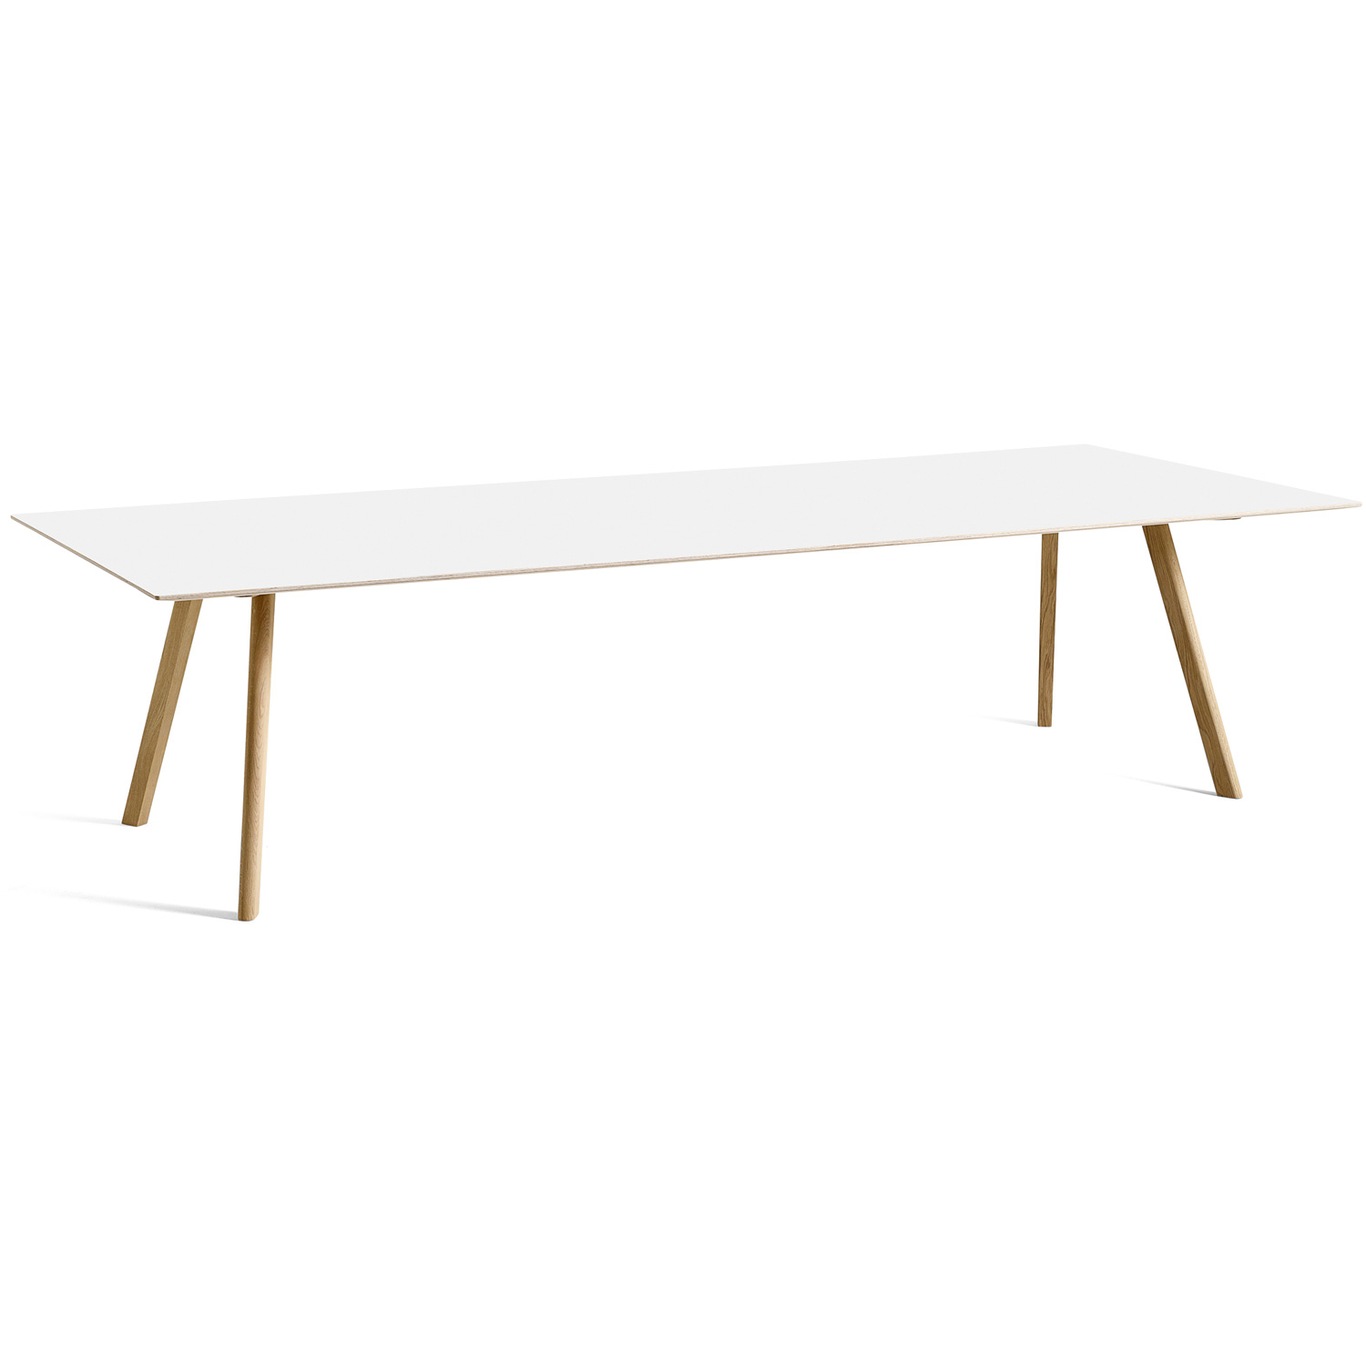 CPH 30 Table 300x90 cm, Water-based Lacquered Oak / White Laminate